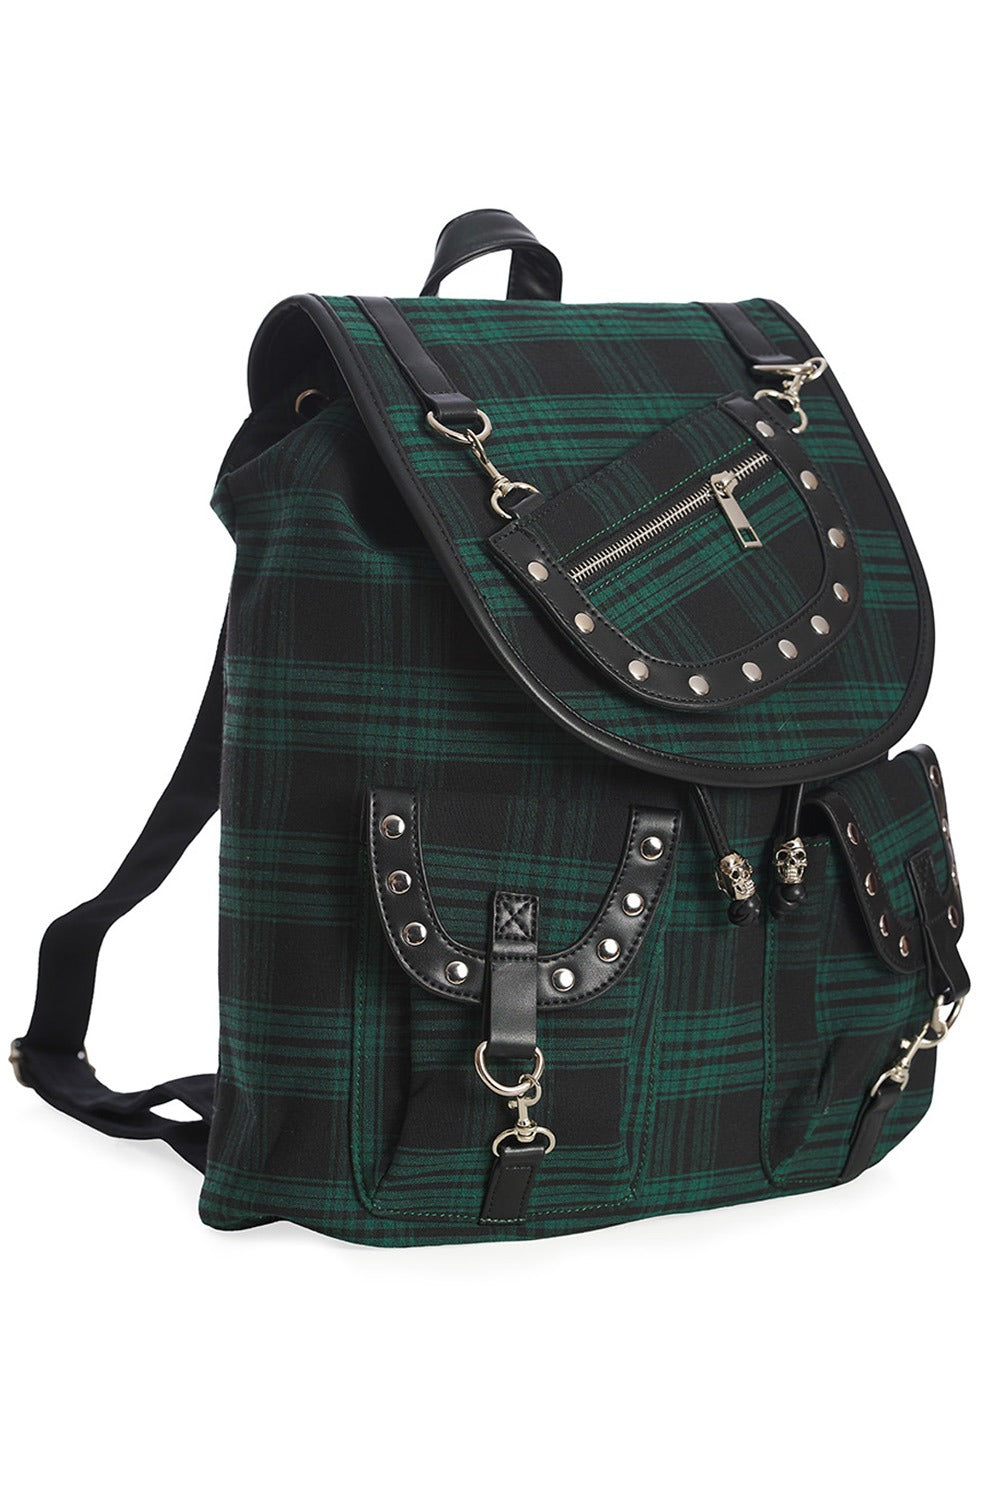 Green Witch Backpack [EMERALD]